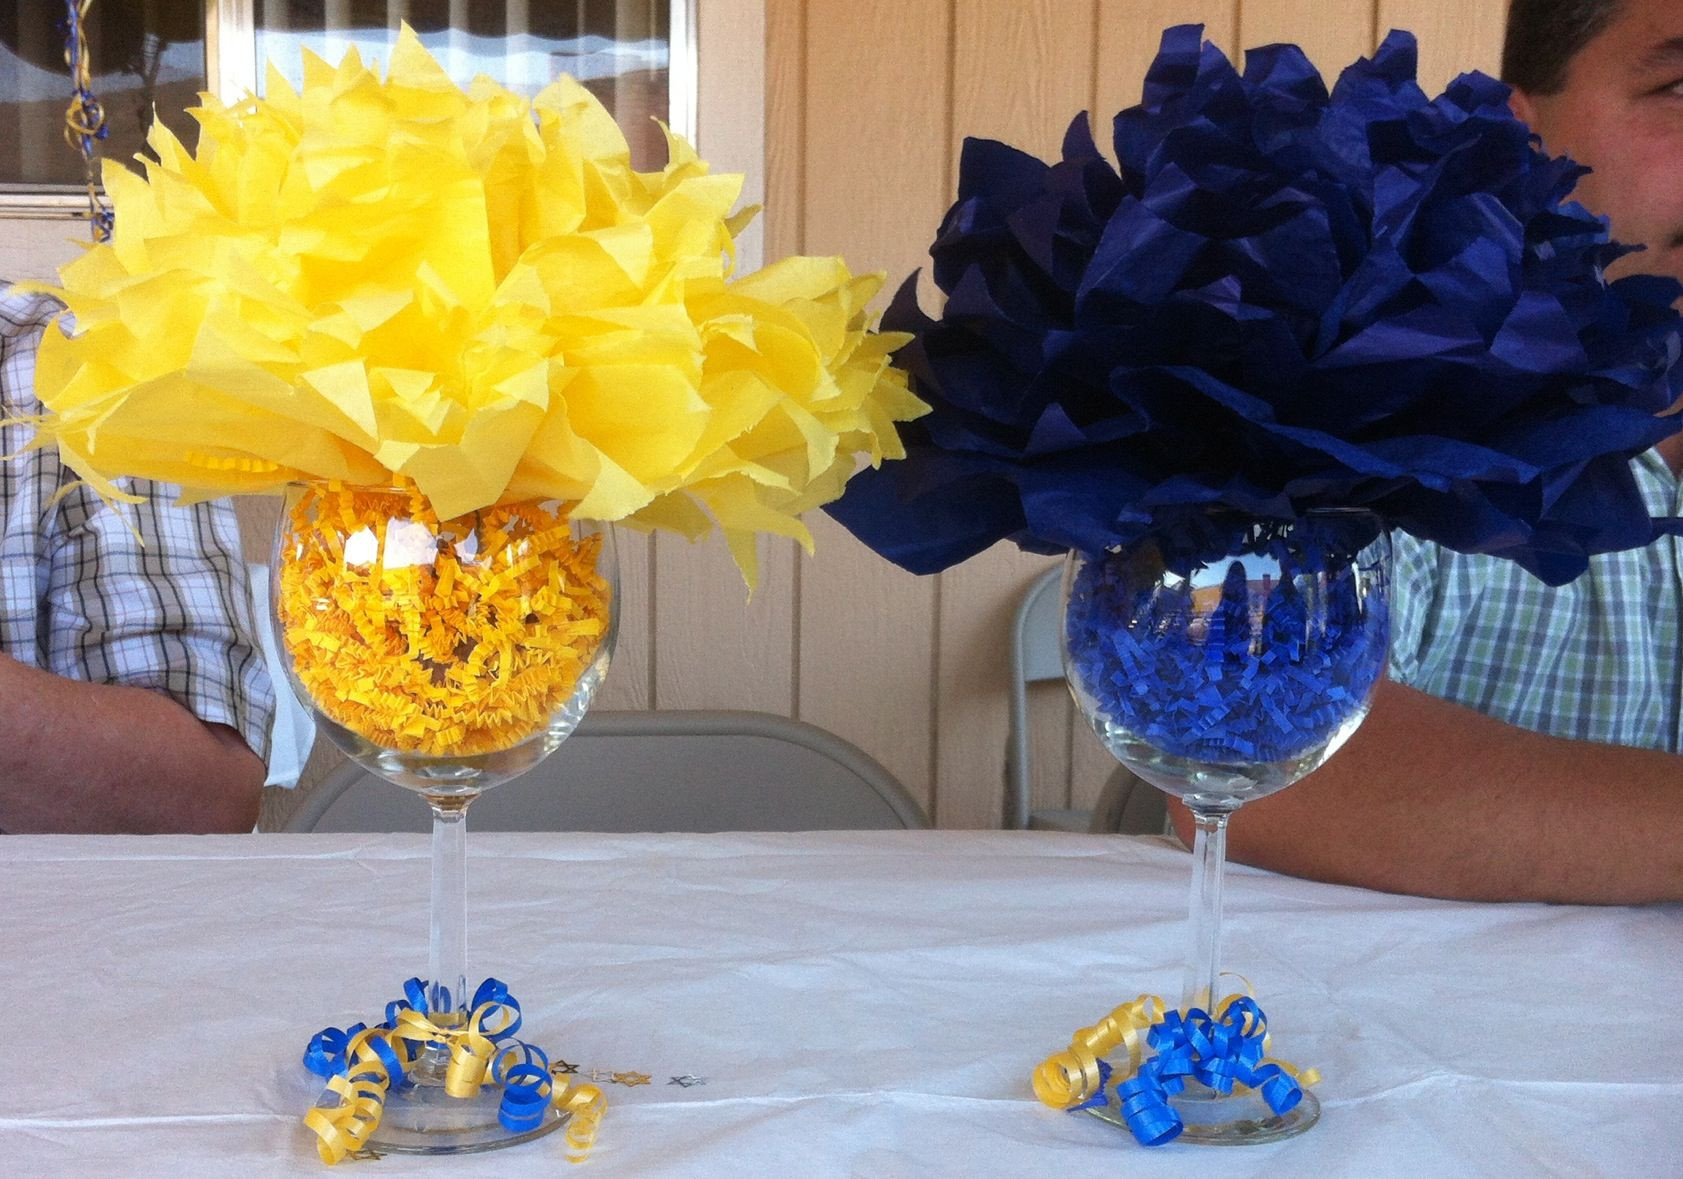 Graduation Party Centerpiece Ideas Cheap
 Can be done in Silver and Blue graduation decorations